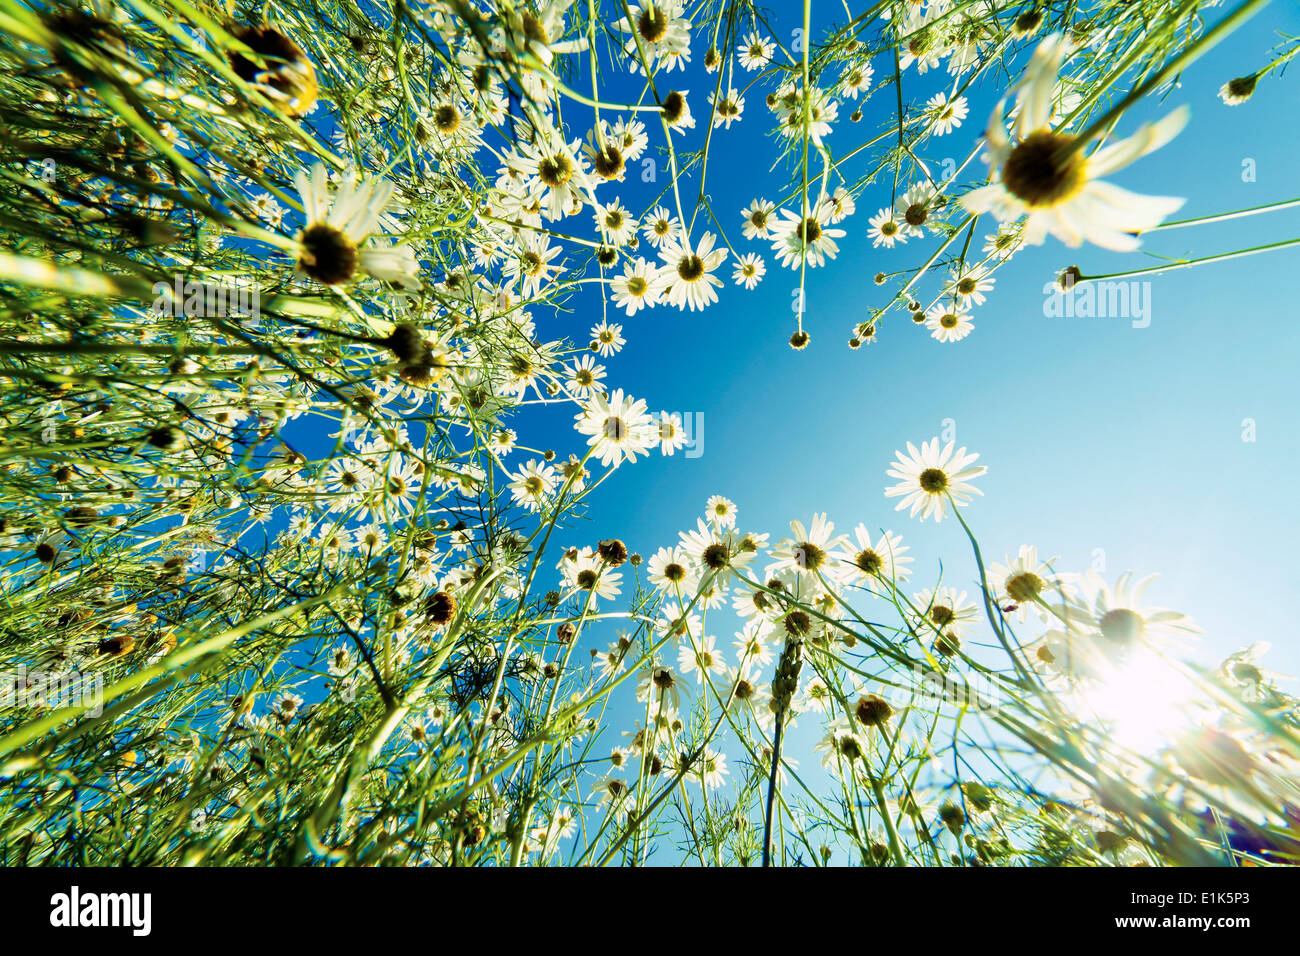 Camomile flowers against a clear blue sky low angle view. Stock Photo